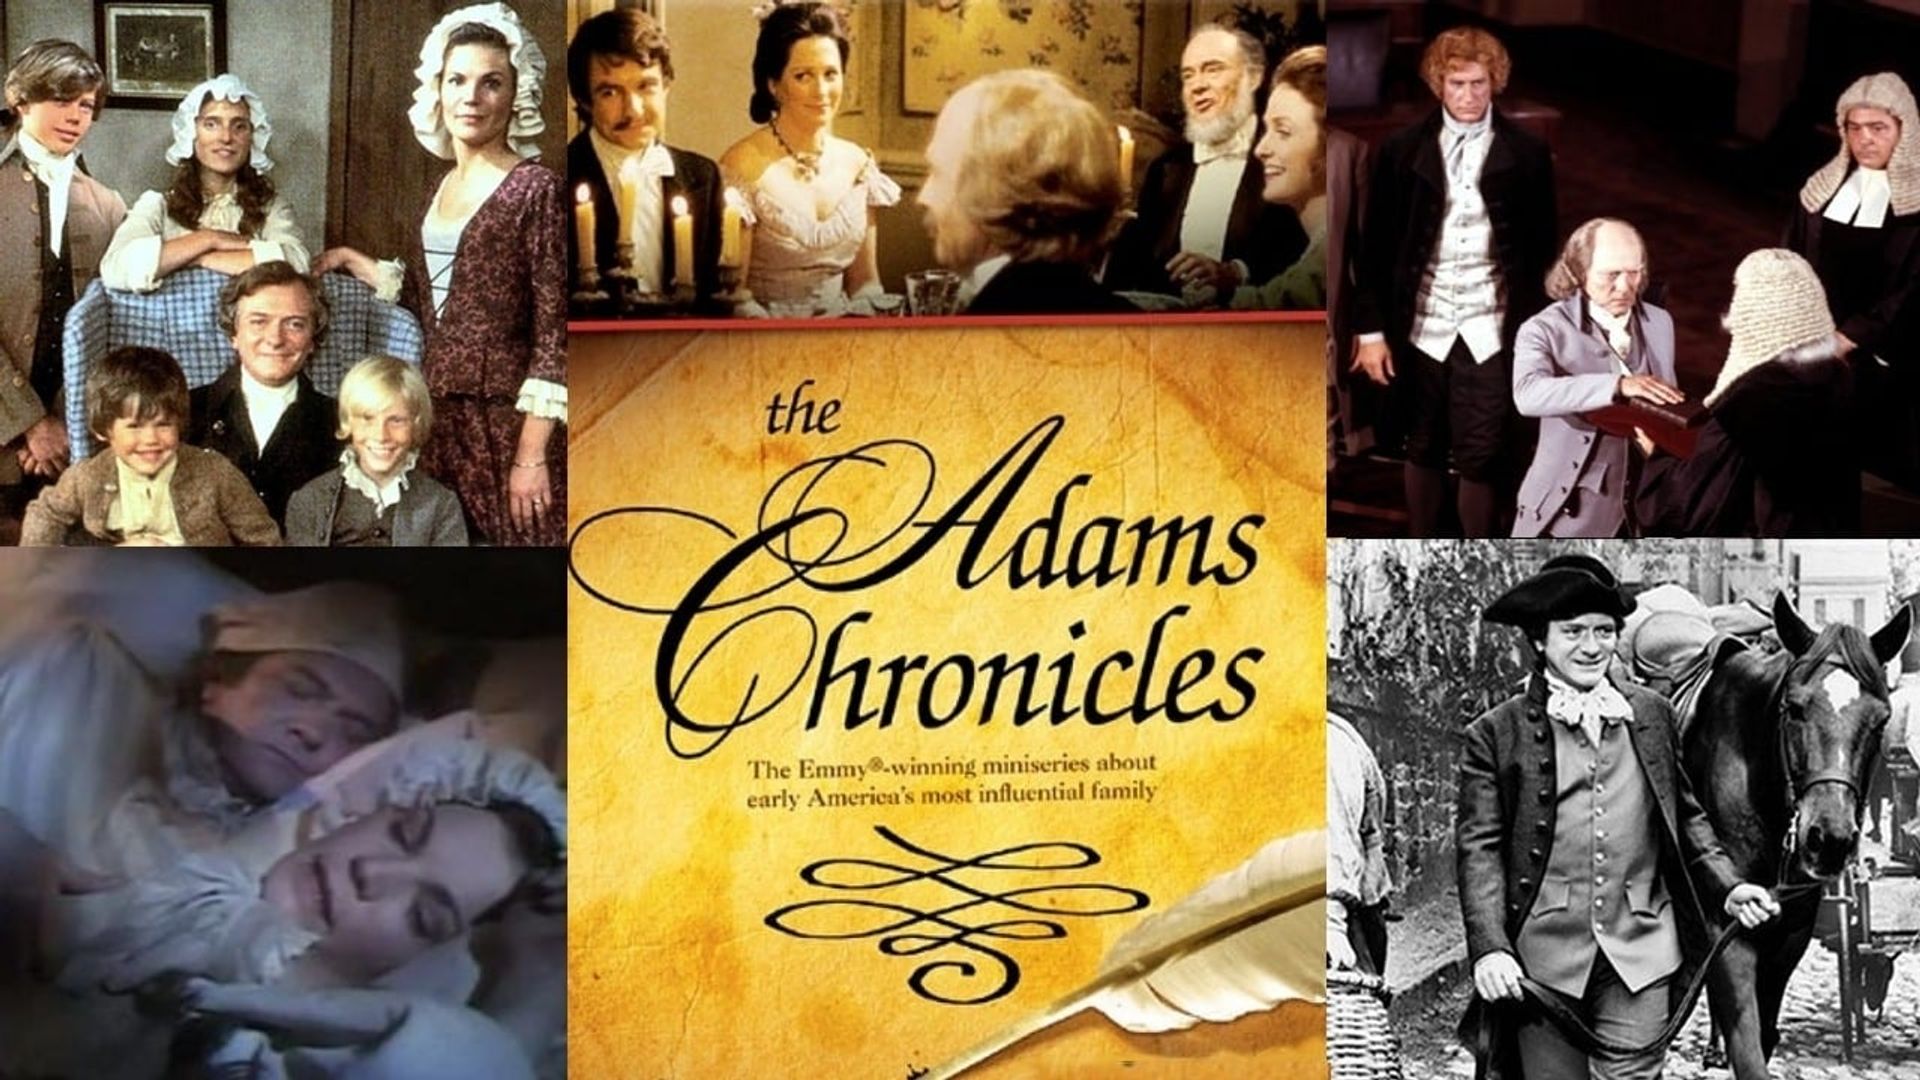 The Adams Chronicles background